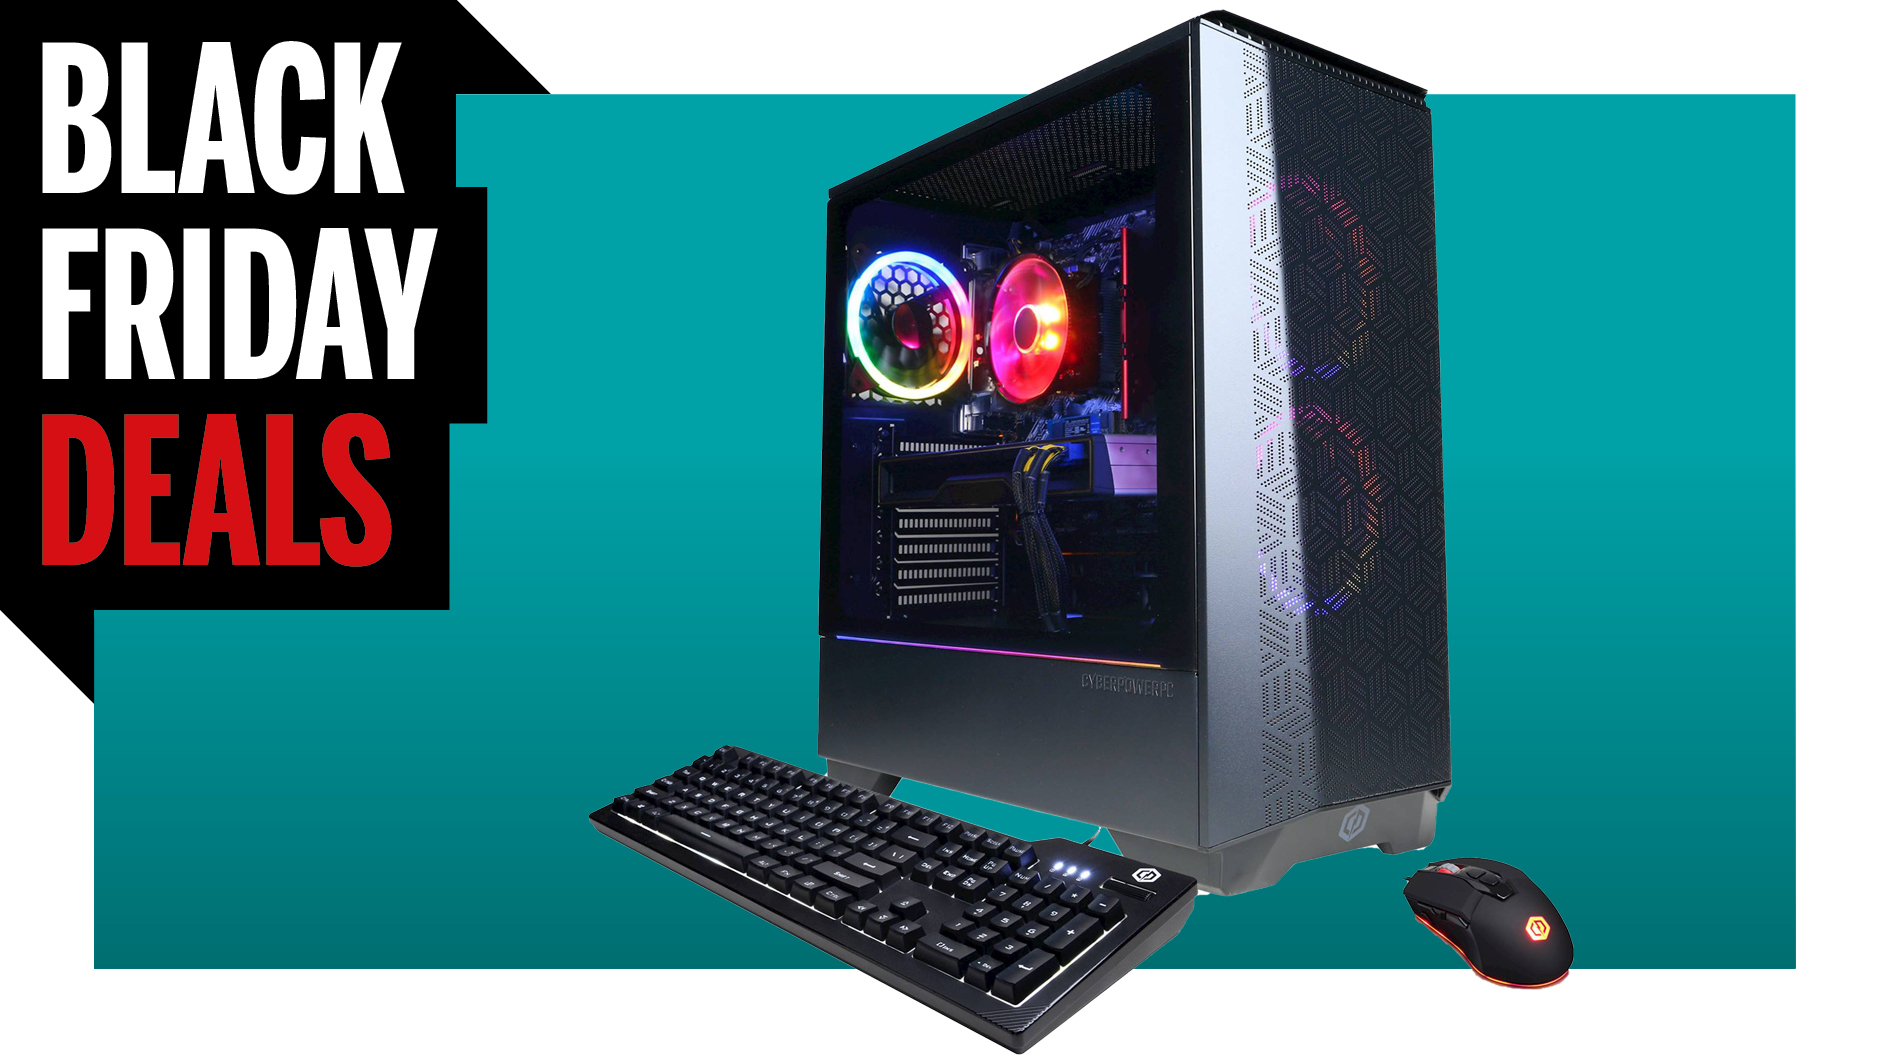  Grab this CyberPowerPC desktop with a Ryzen 5 3600 and RX 6600 XT for $1000 